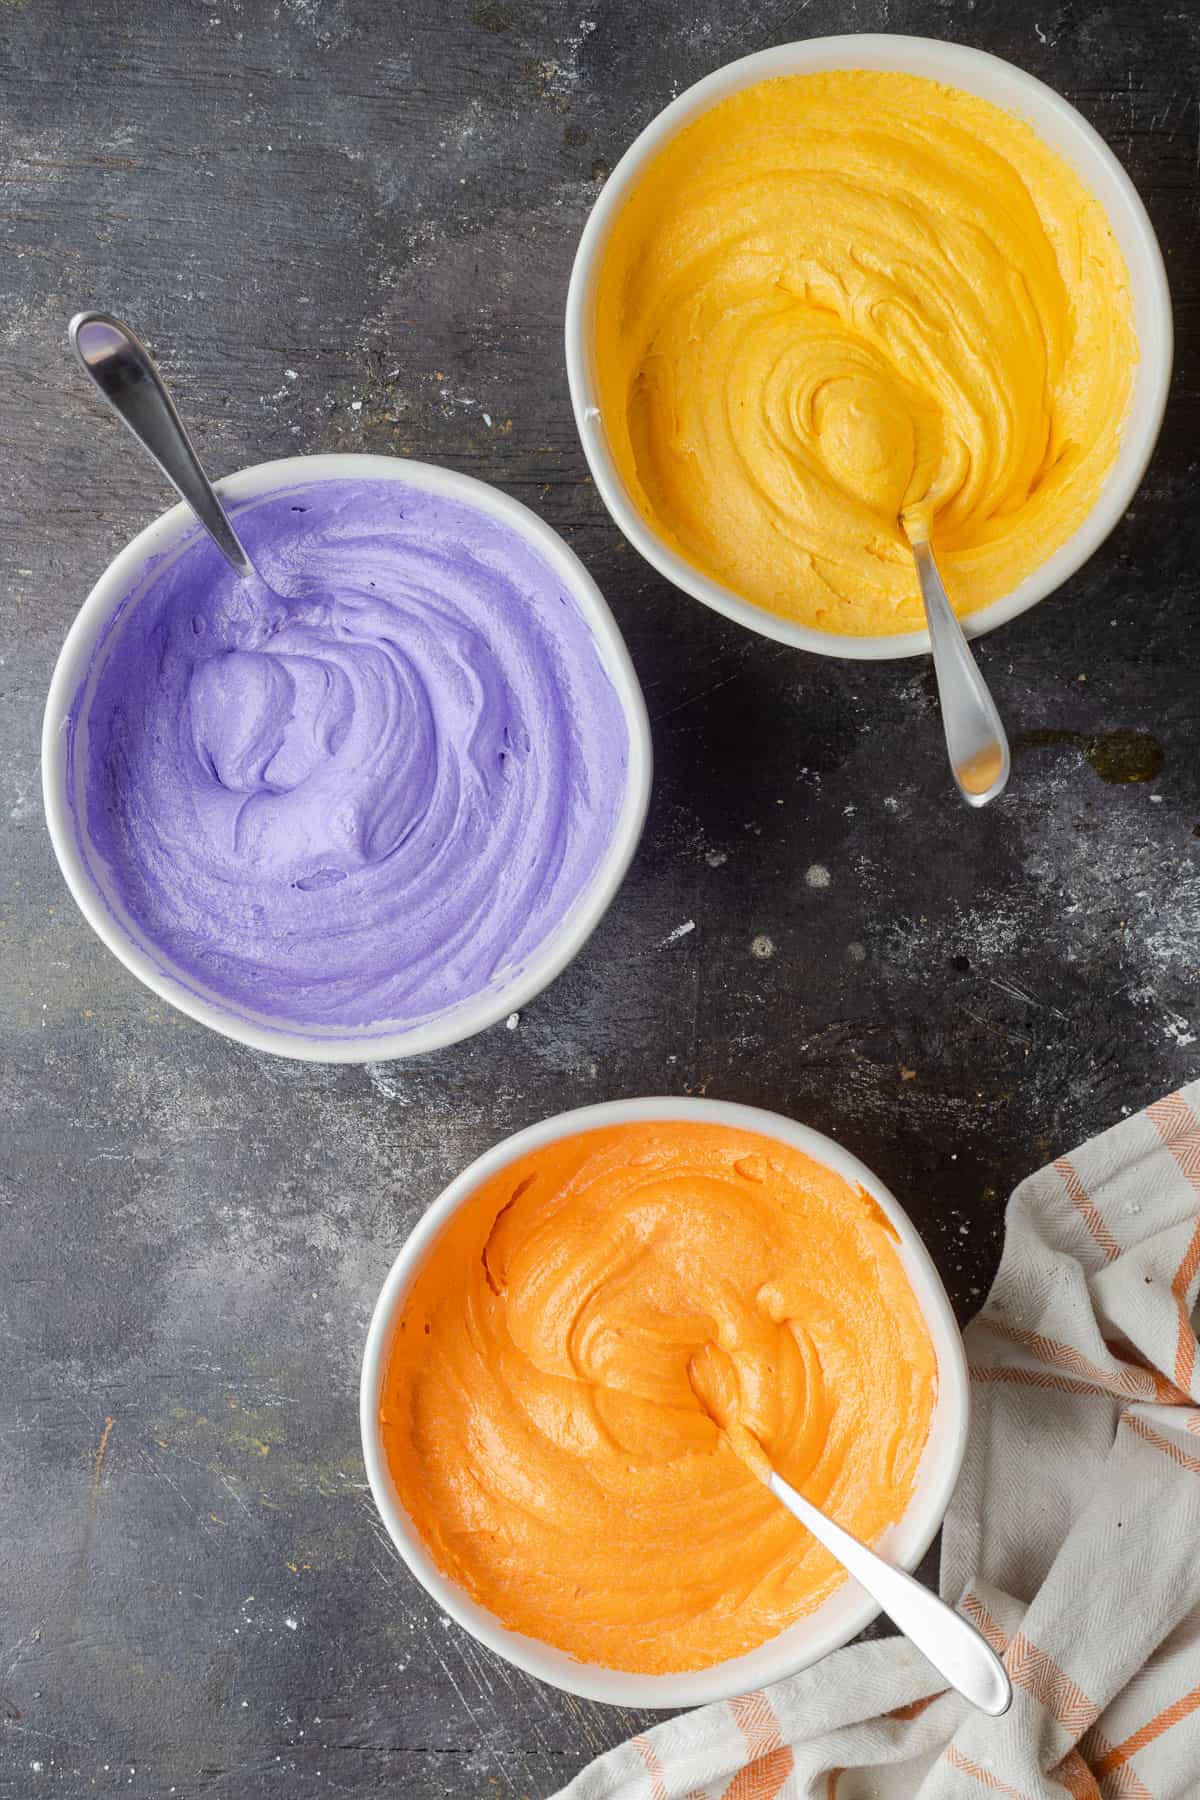 Adding yellow, purple, and orange food coloring to each bowl of frosting to make three different colors.